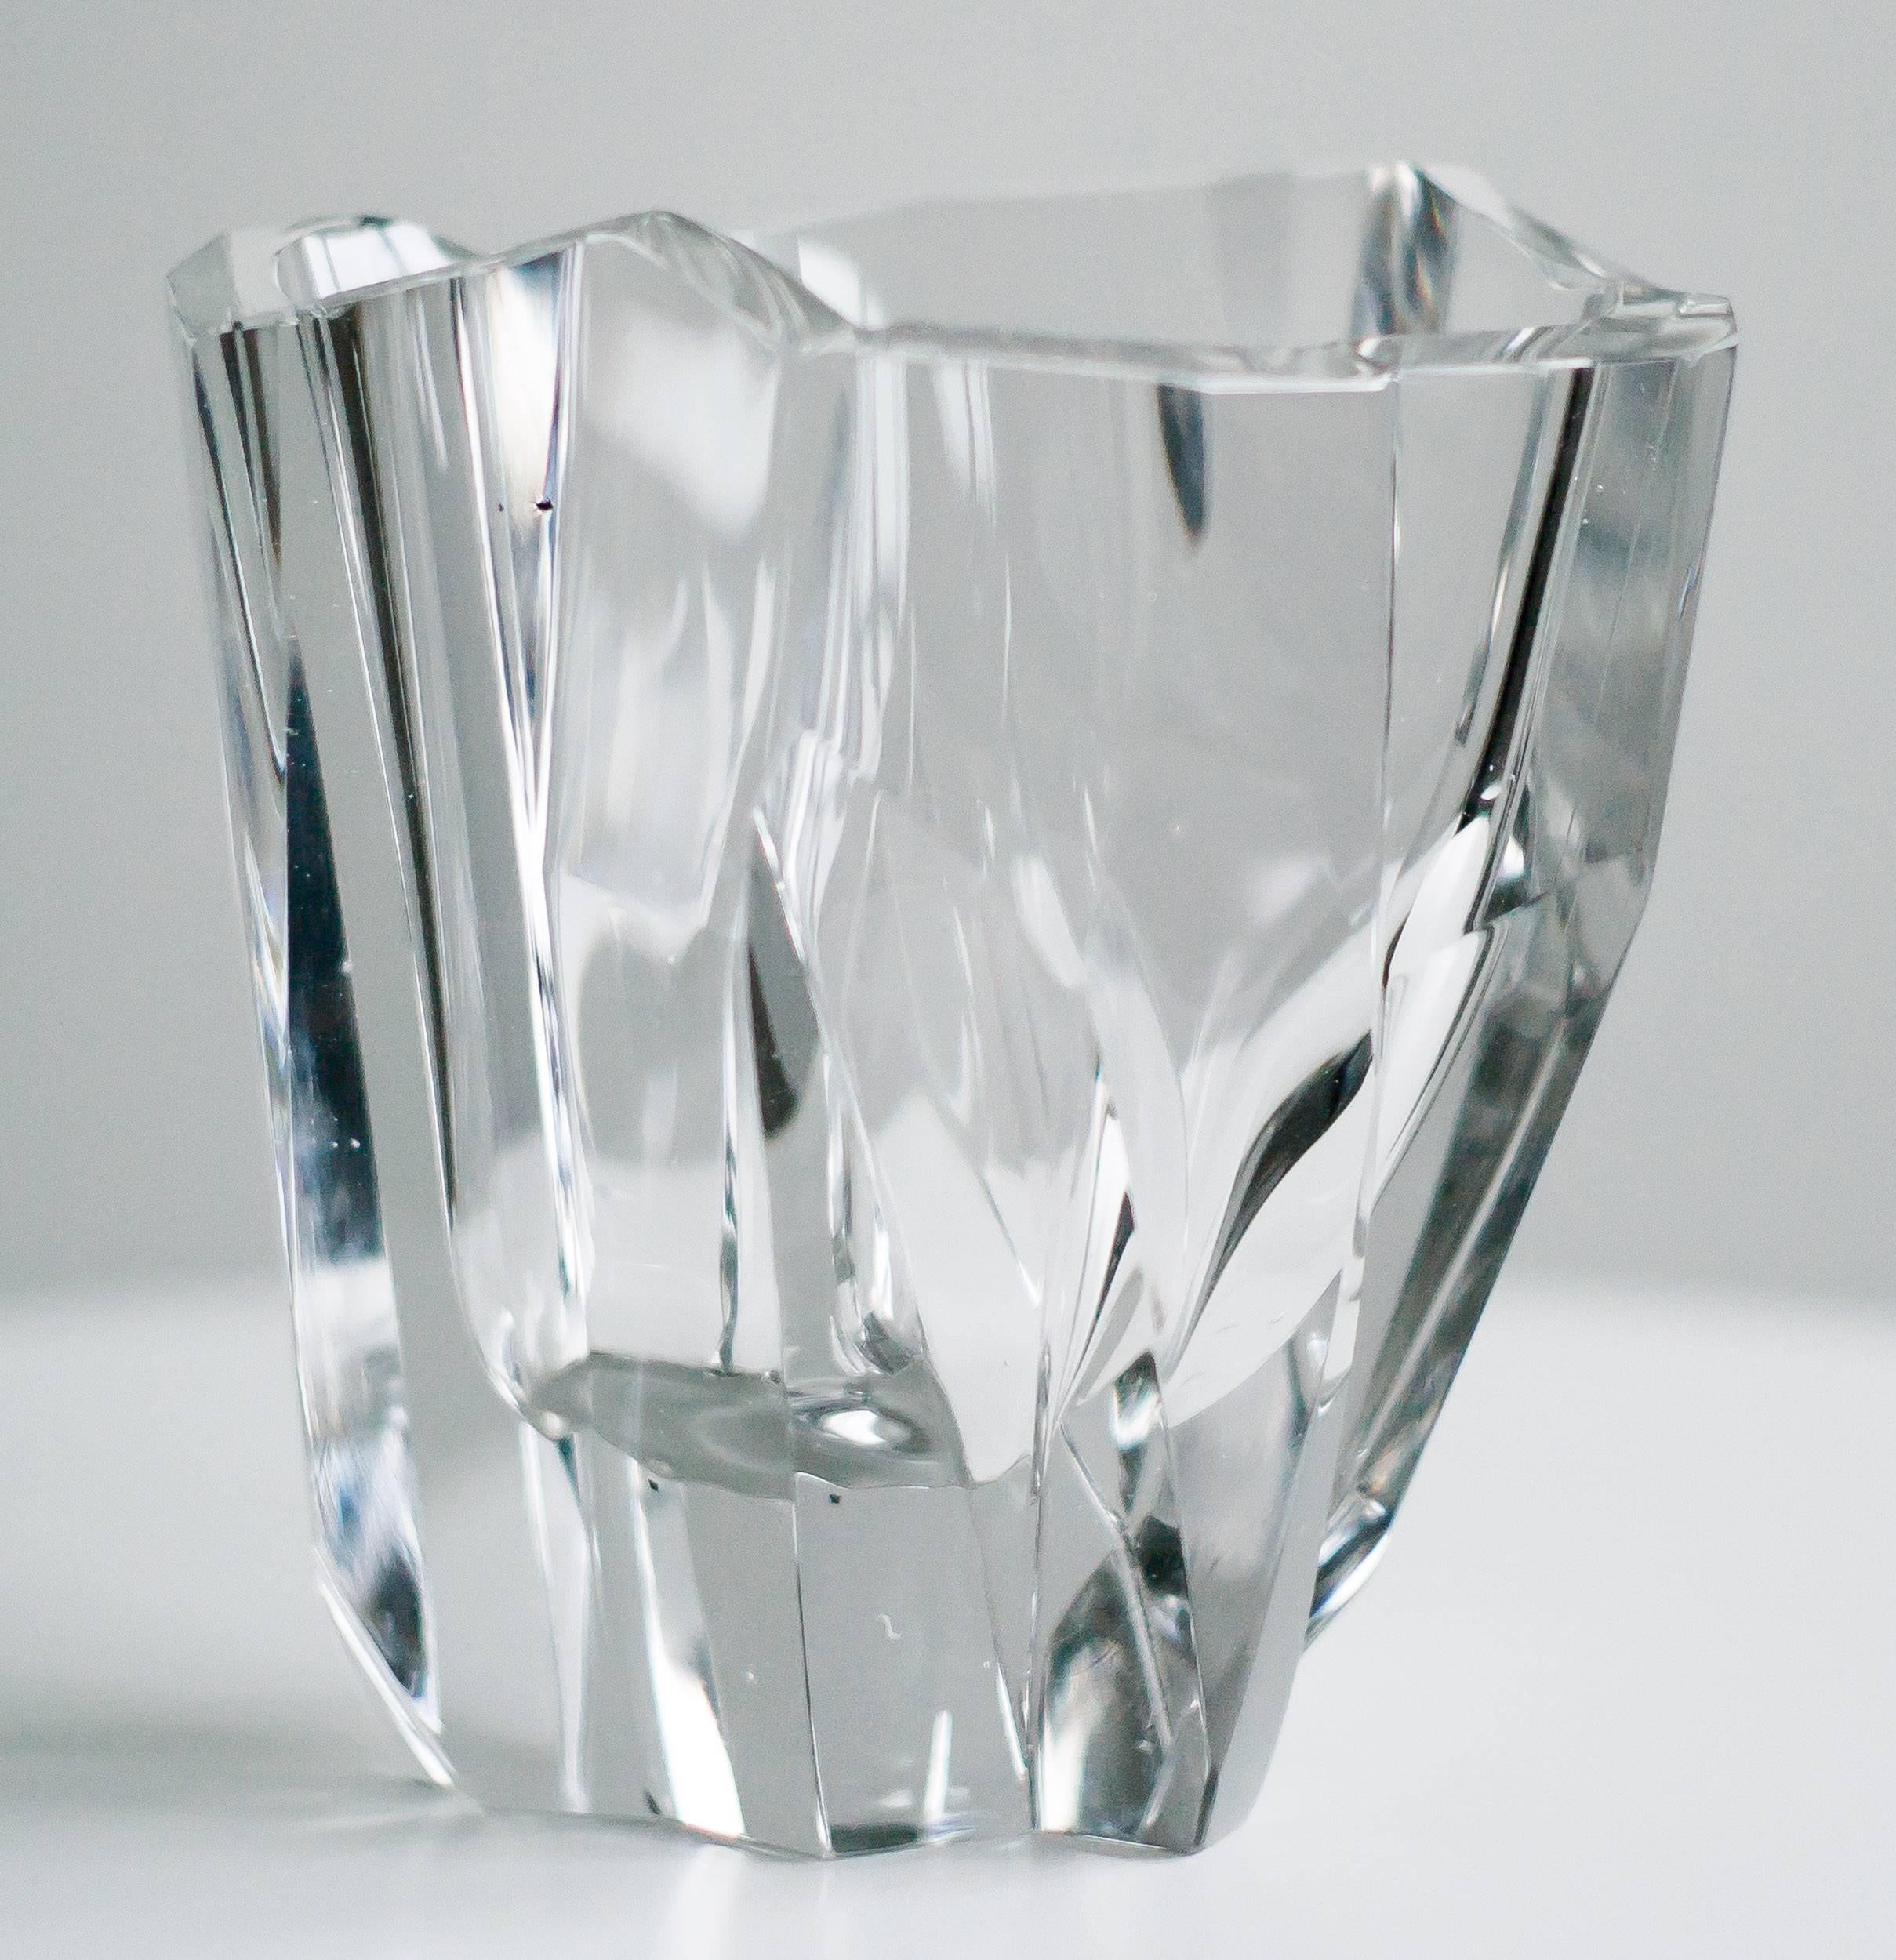 Still-mould blown crystal glass. 
Produced by Iittala, Finland. Signed and numbered.

Complimentary worldwide shipping.